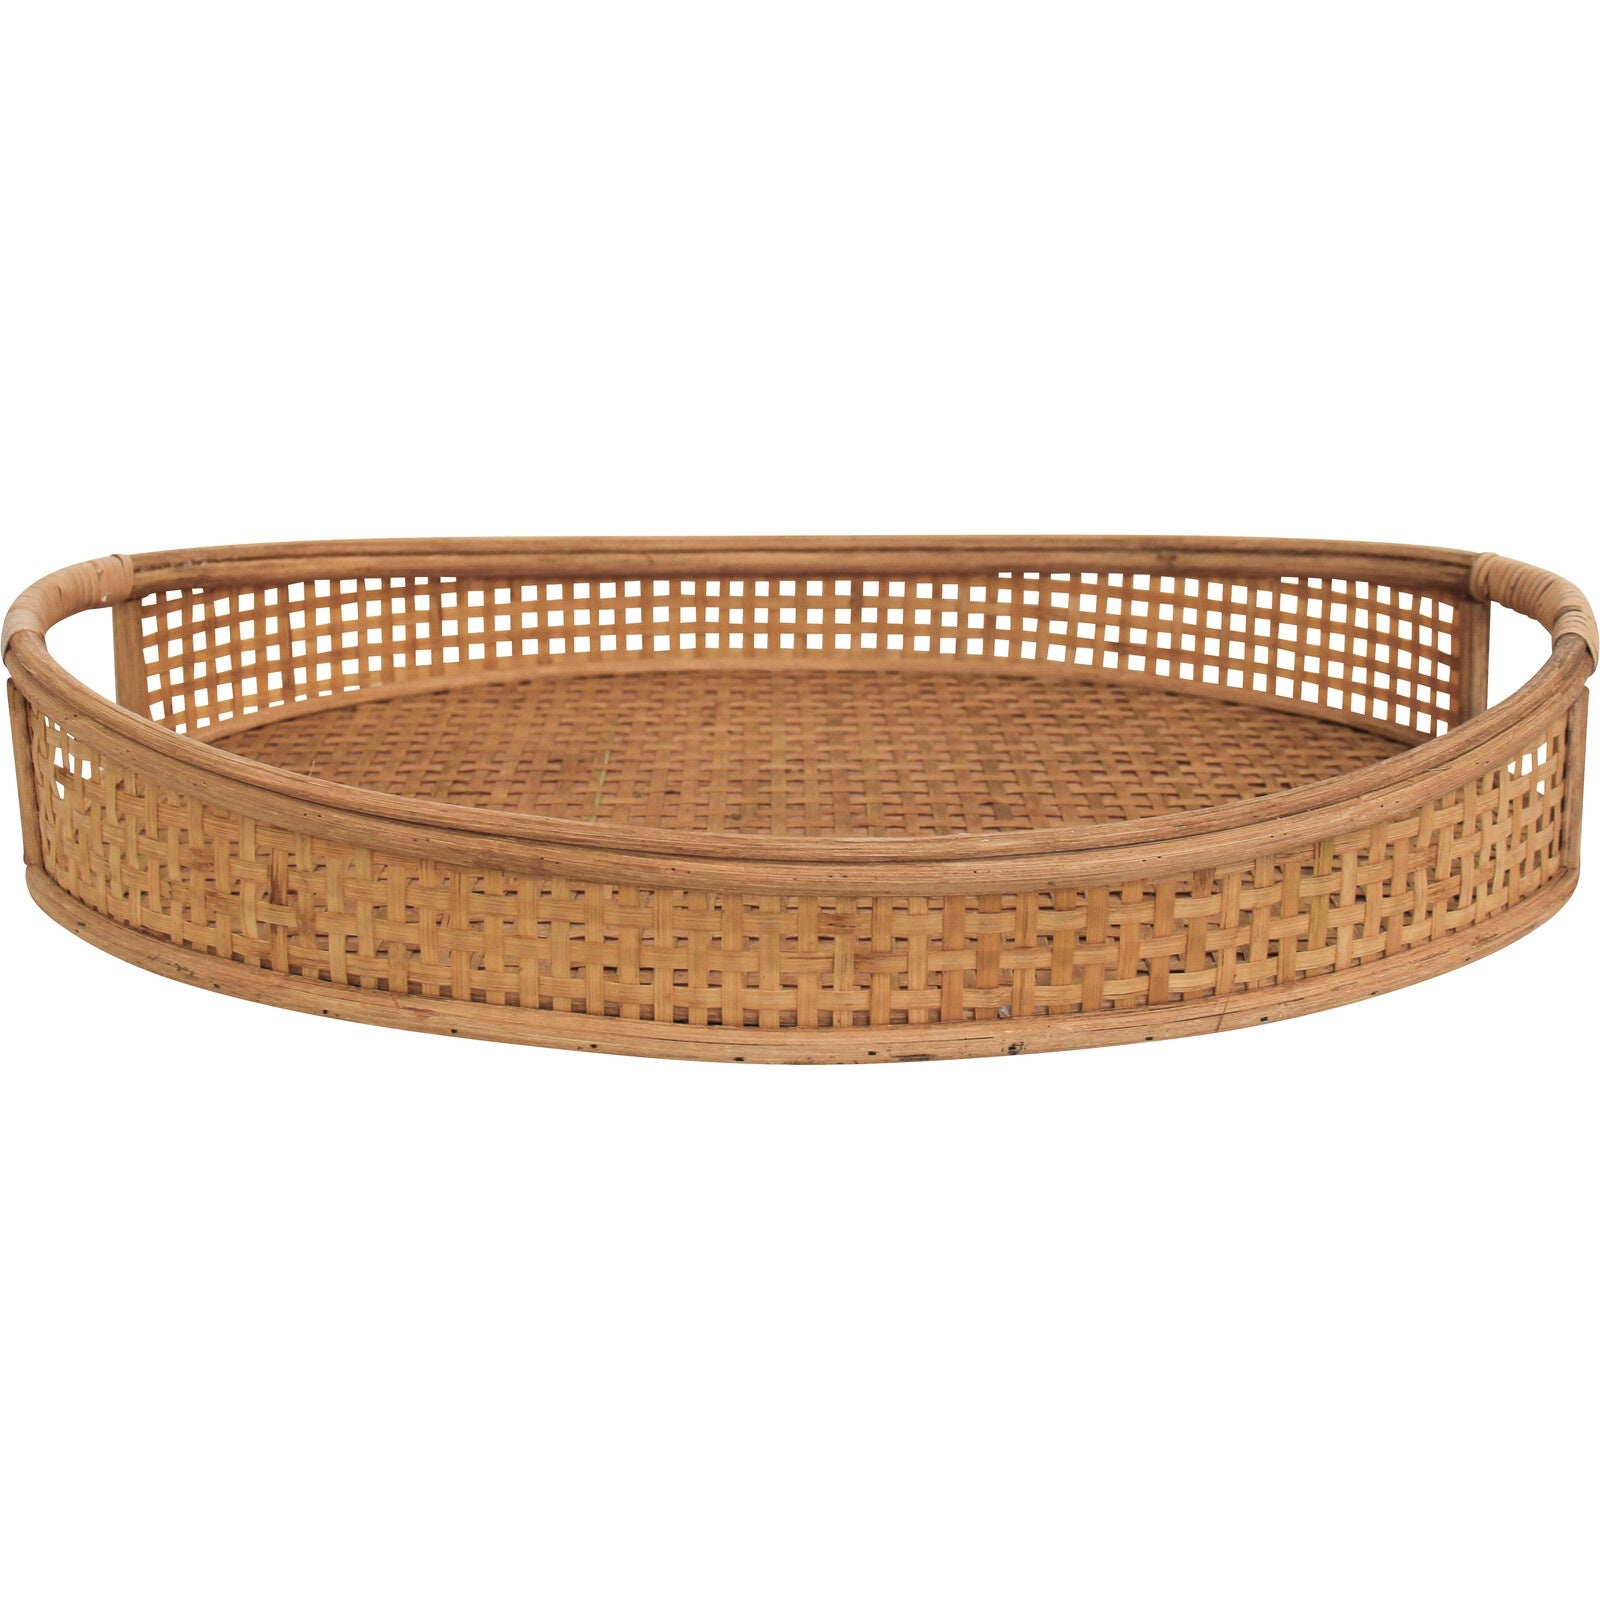 Oval Rattan Tray - Natural